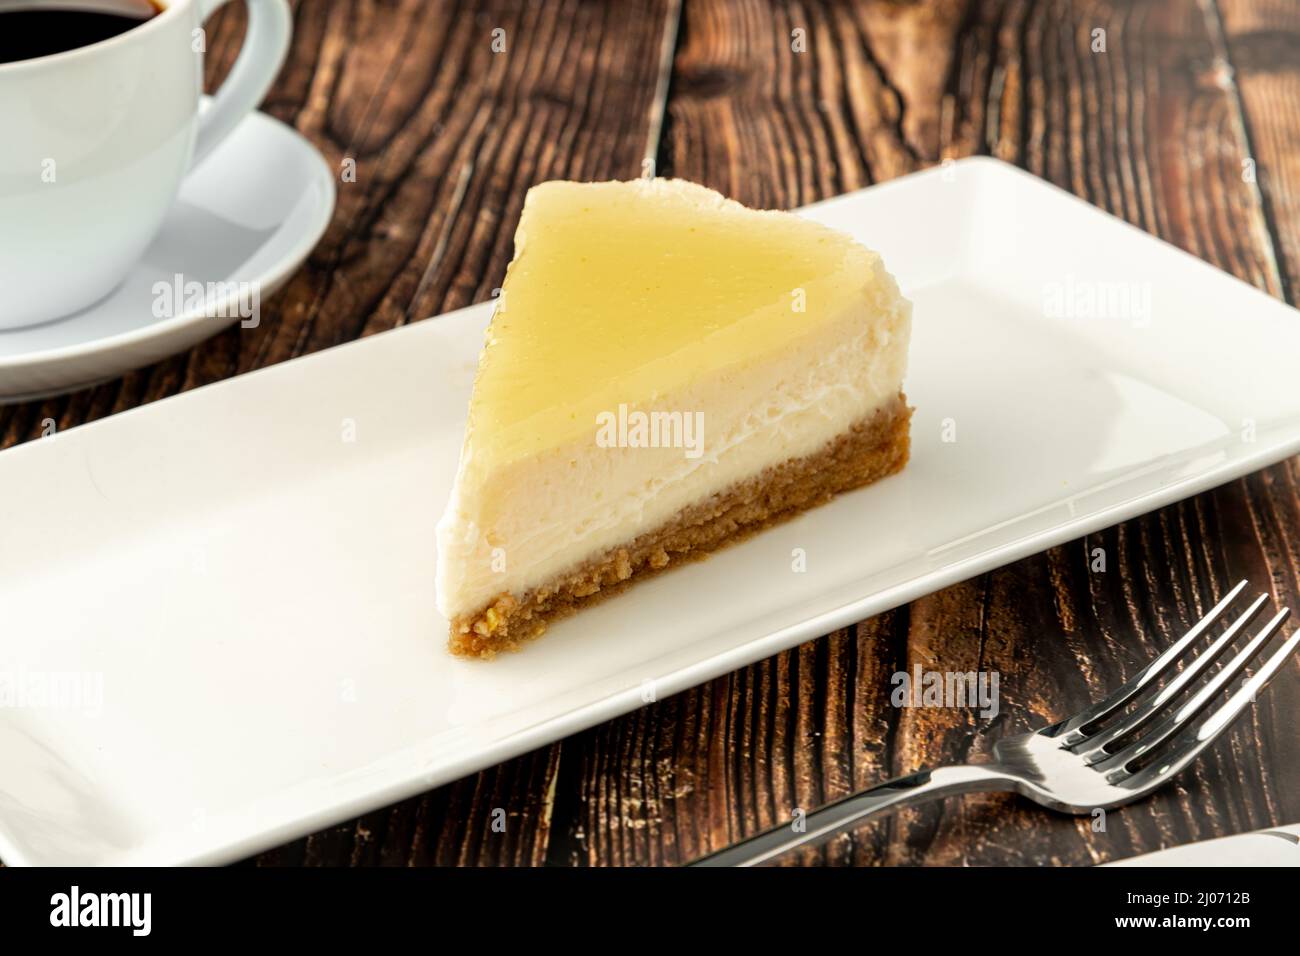 Delicious lemon cheesecake served with coffee on wooden table Stock Photo